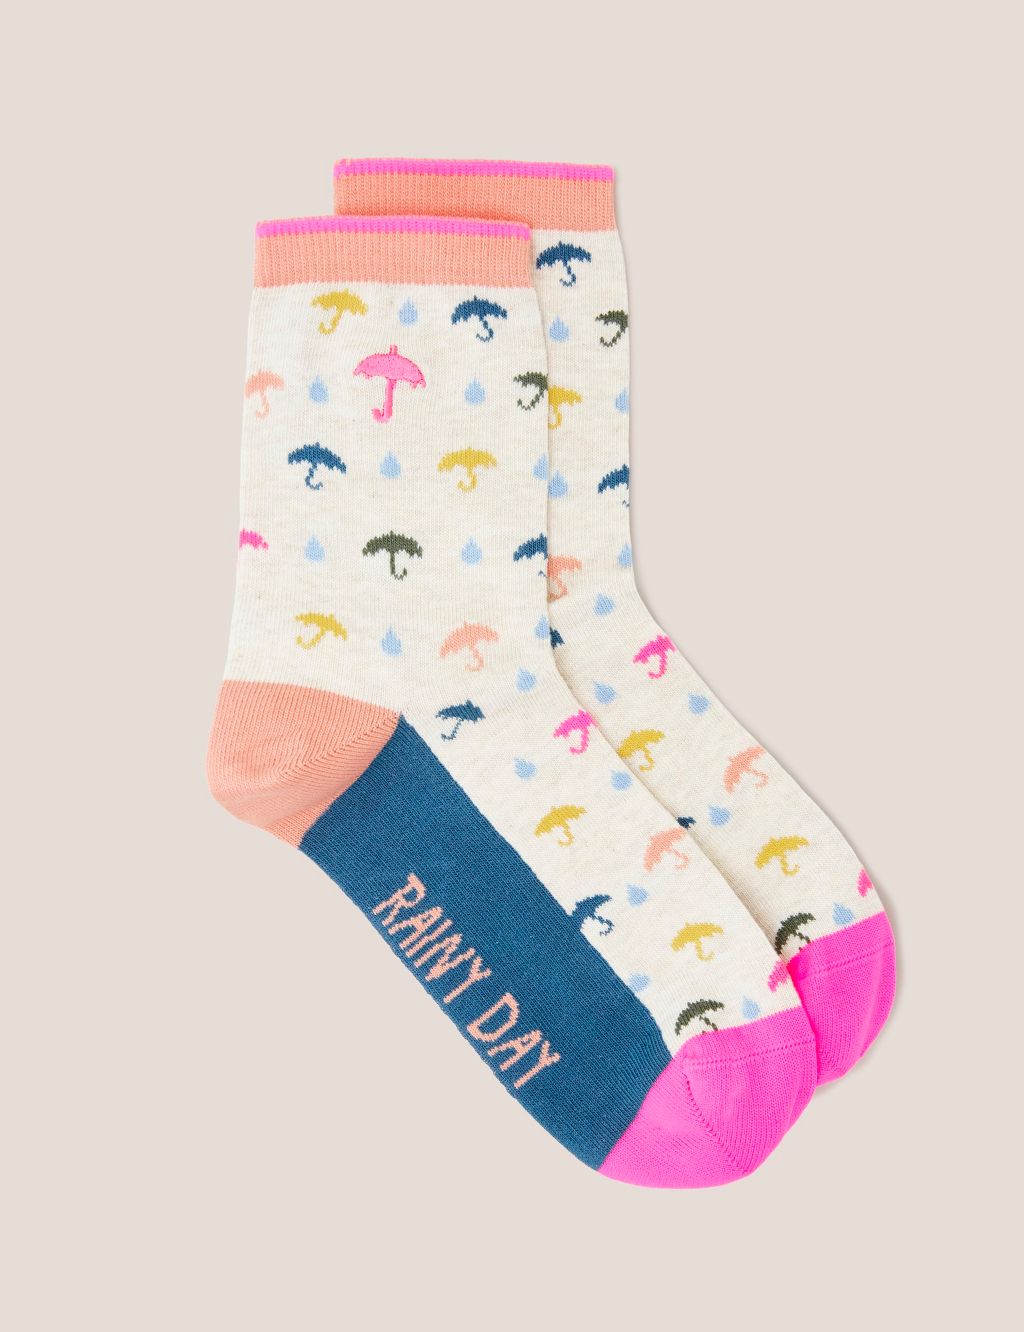 Cotton Rich Rainy Day Ankle High Socks